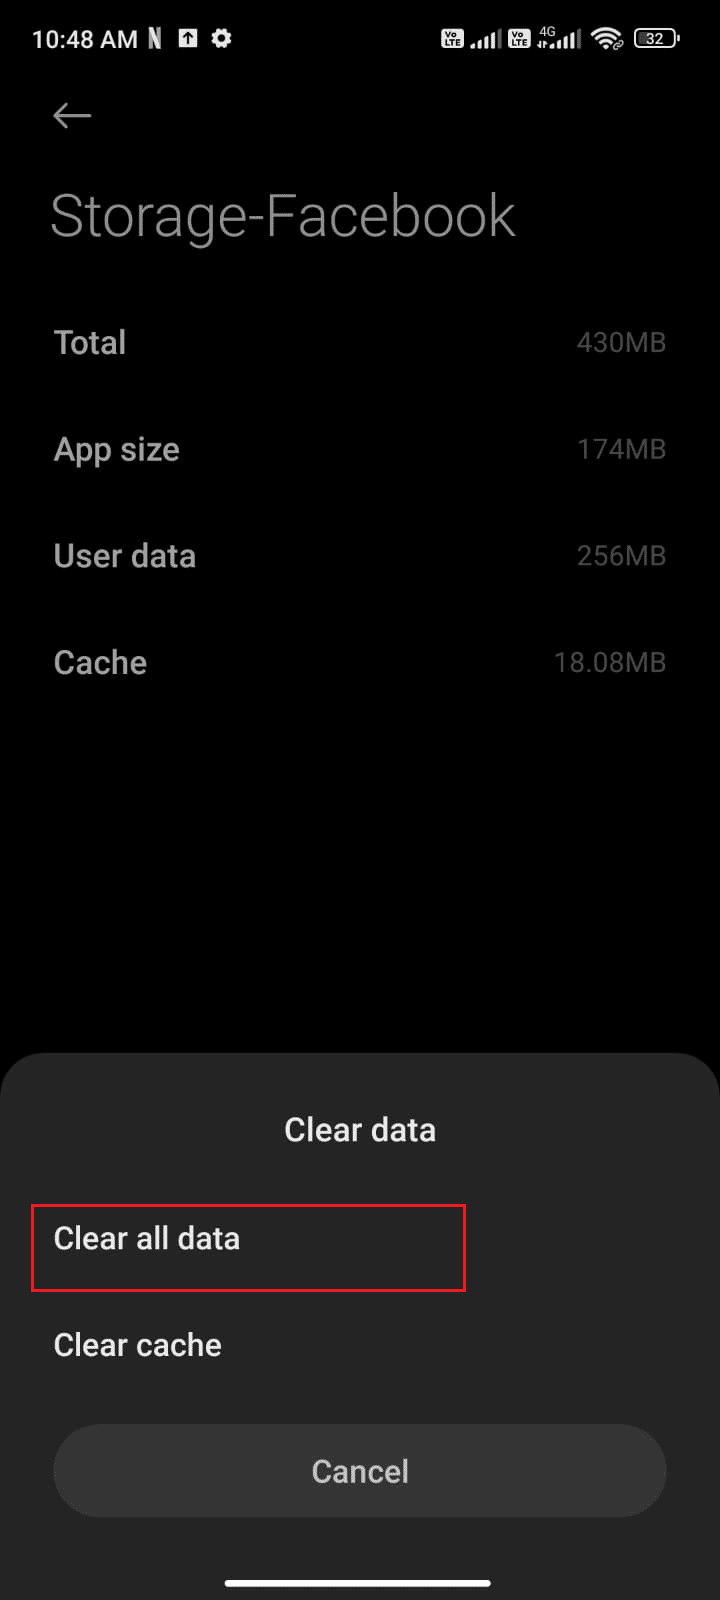 You can also tap Clear all data if you want all data to be deleted in Facebook